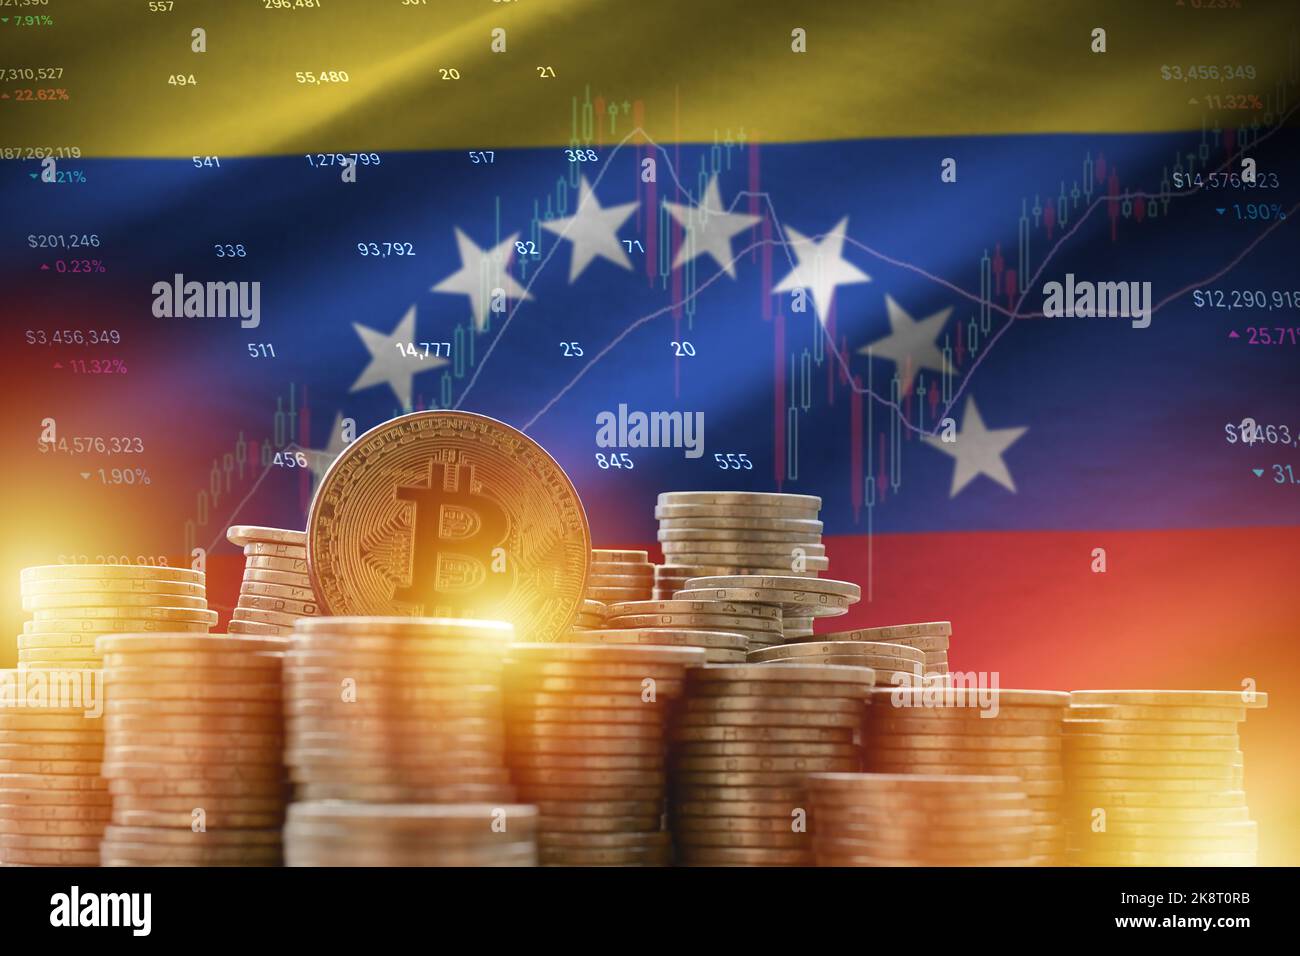 Venezuela flag and big amount of golden bitcoin coins and trading platform chart. Crypto currency concept Stock Photo